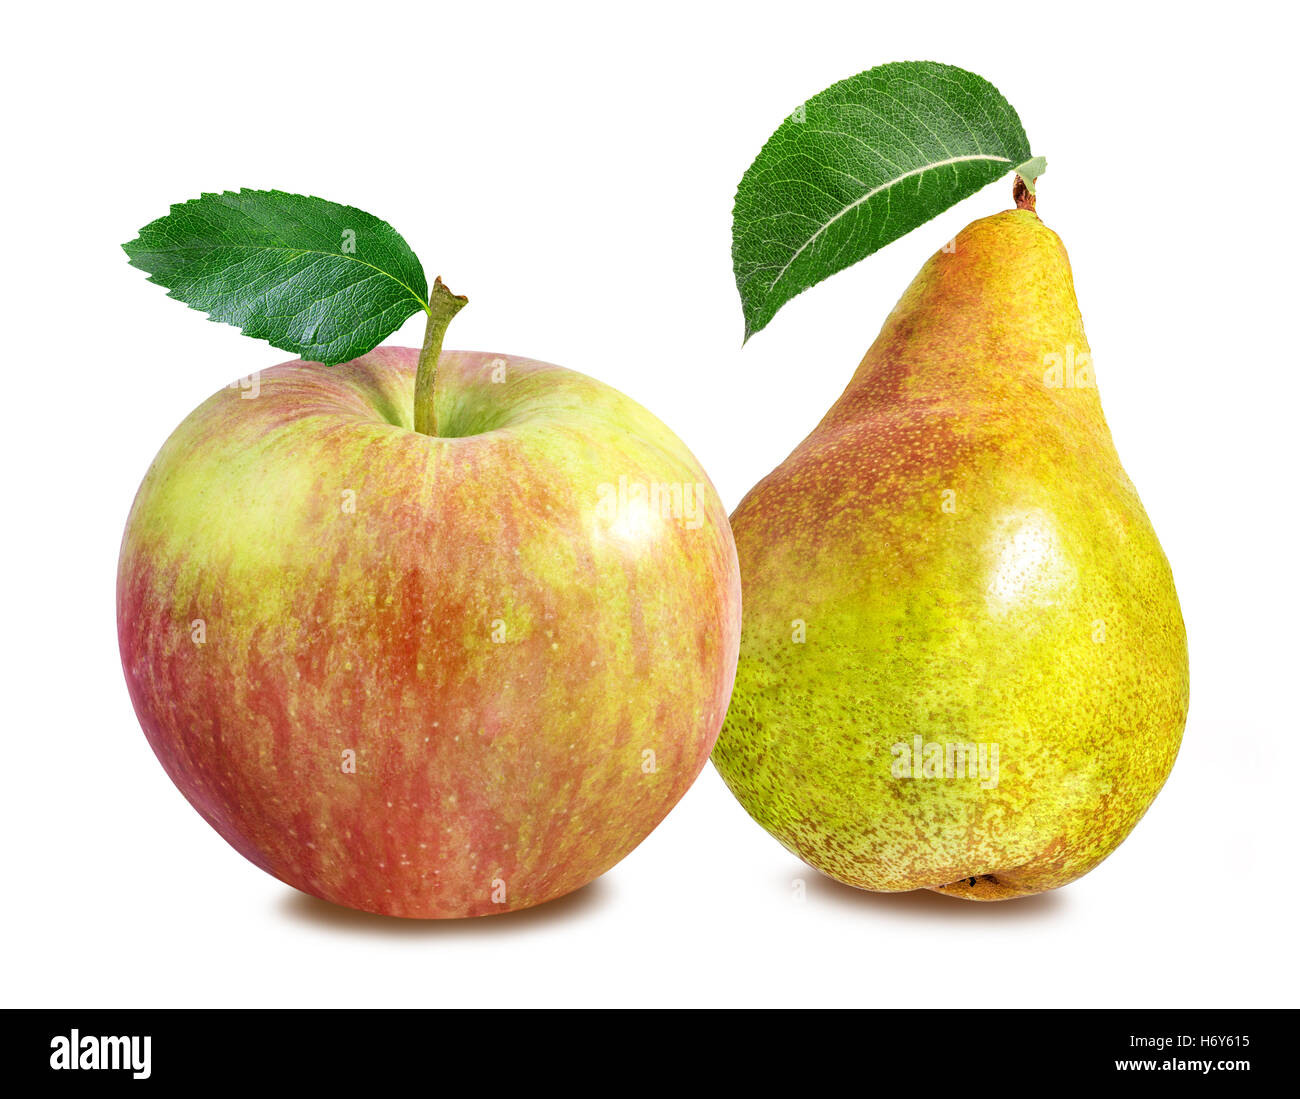 apple and pear isolated on white background Stock Photo